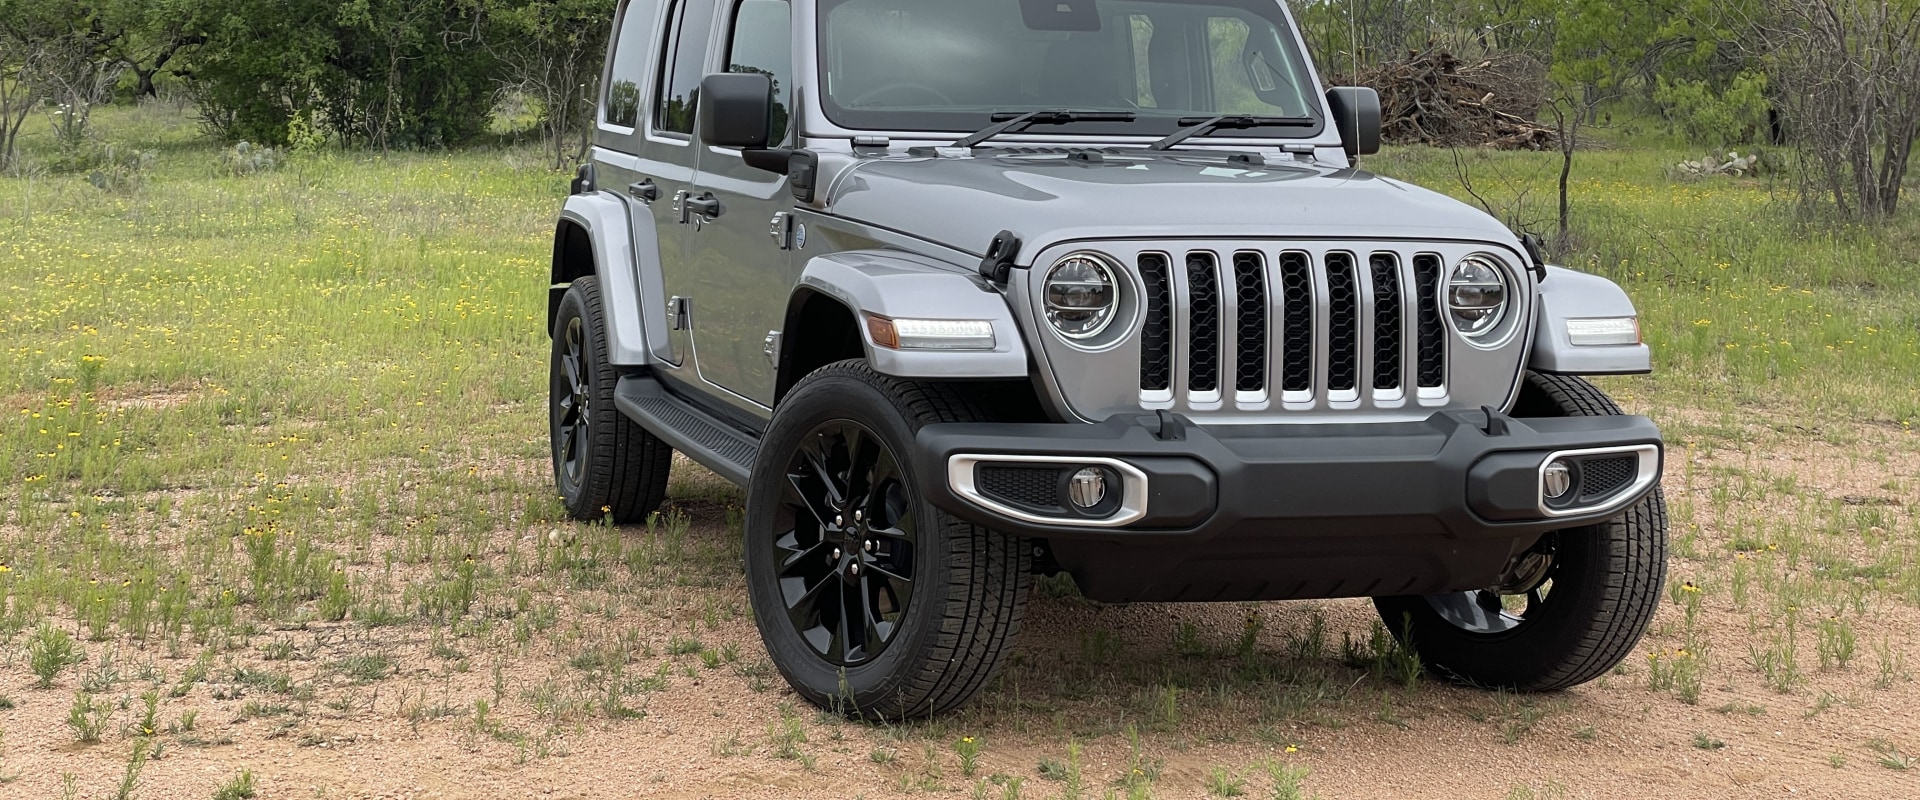 A Comprehensive Look at the Jeep Wrangler